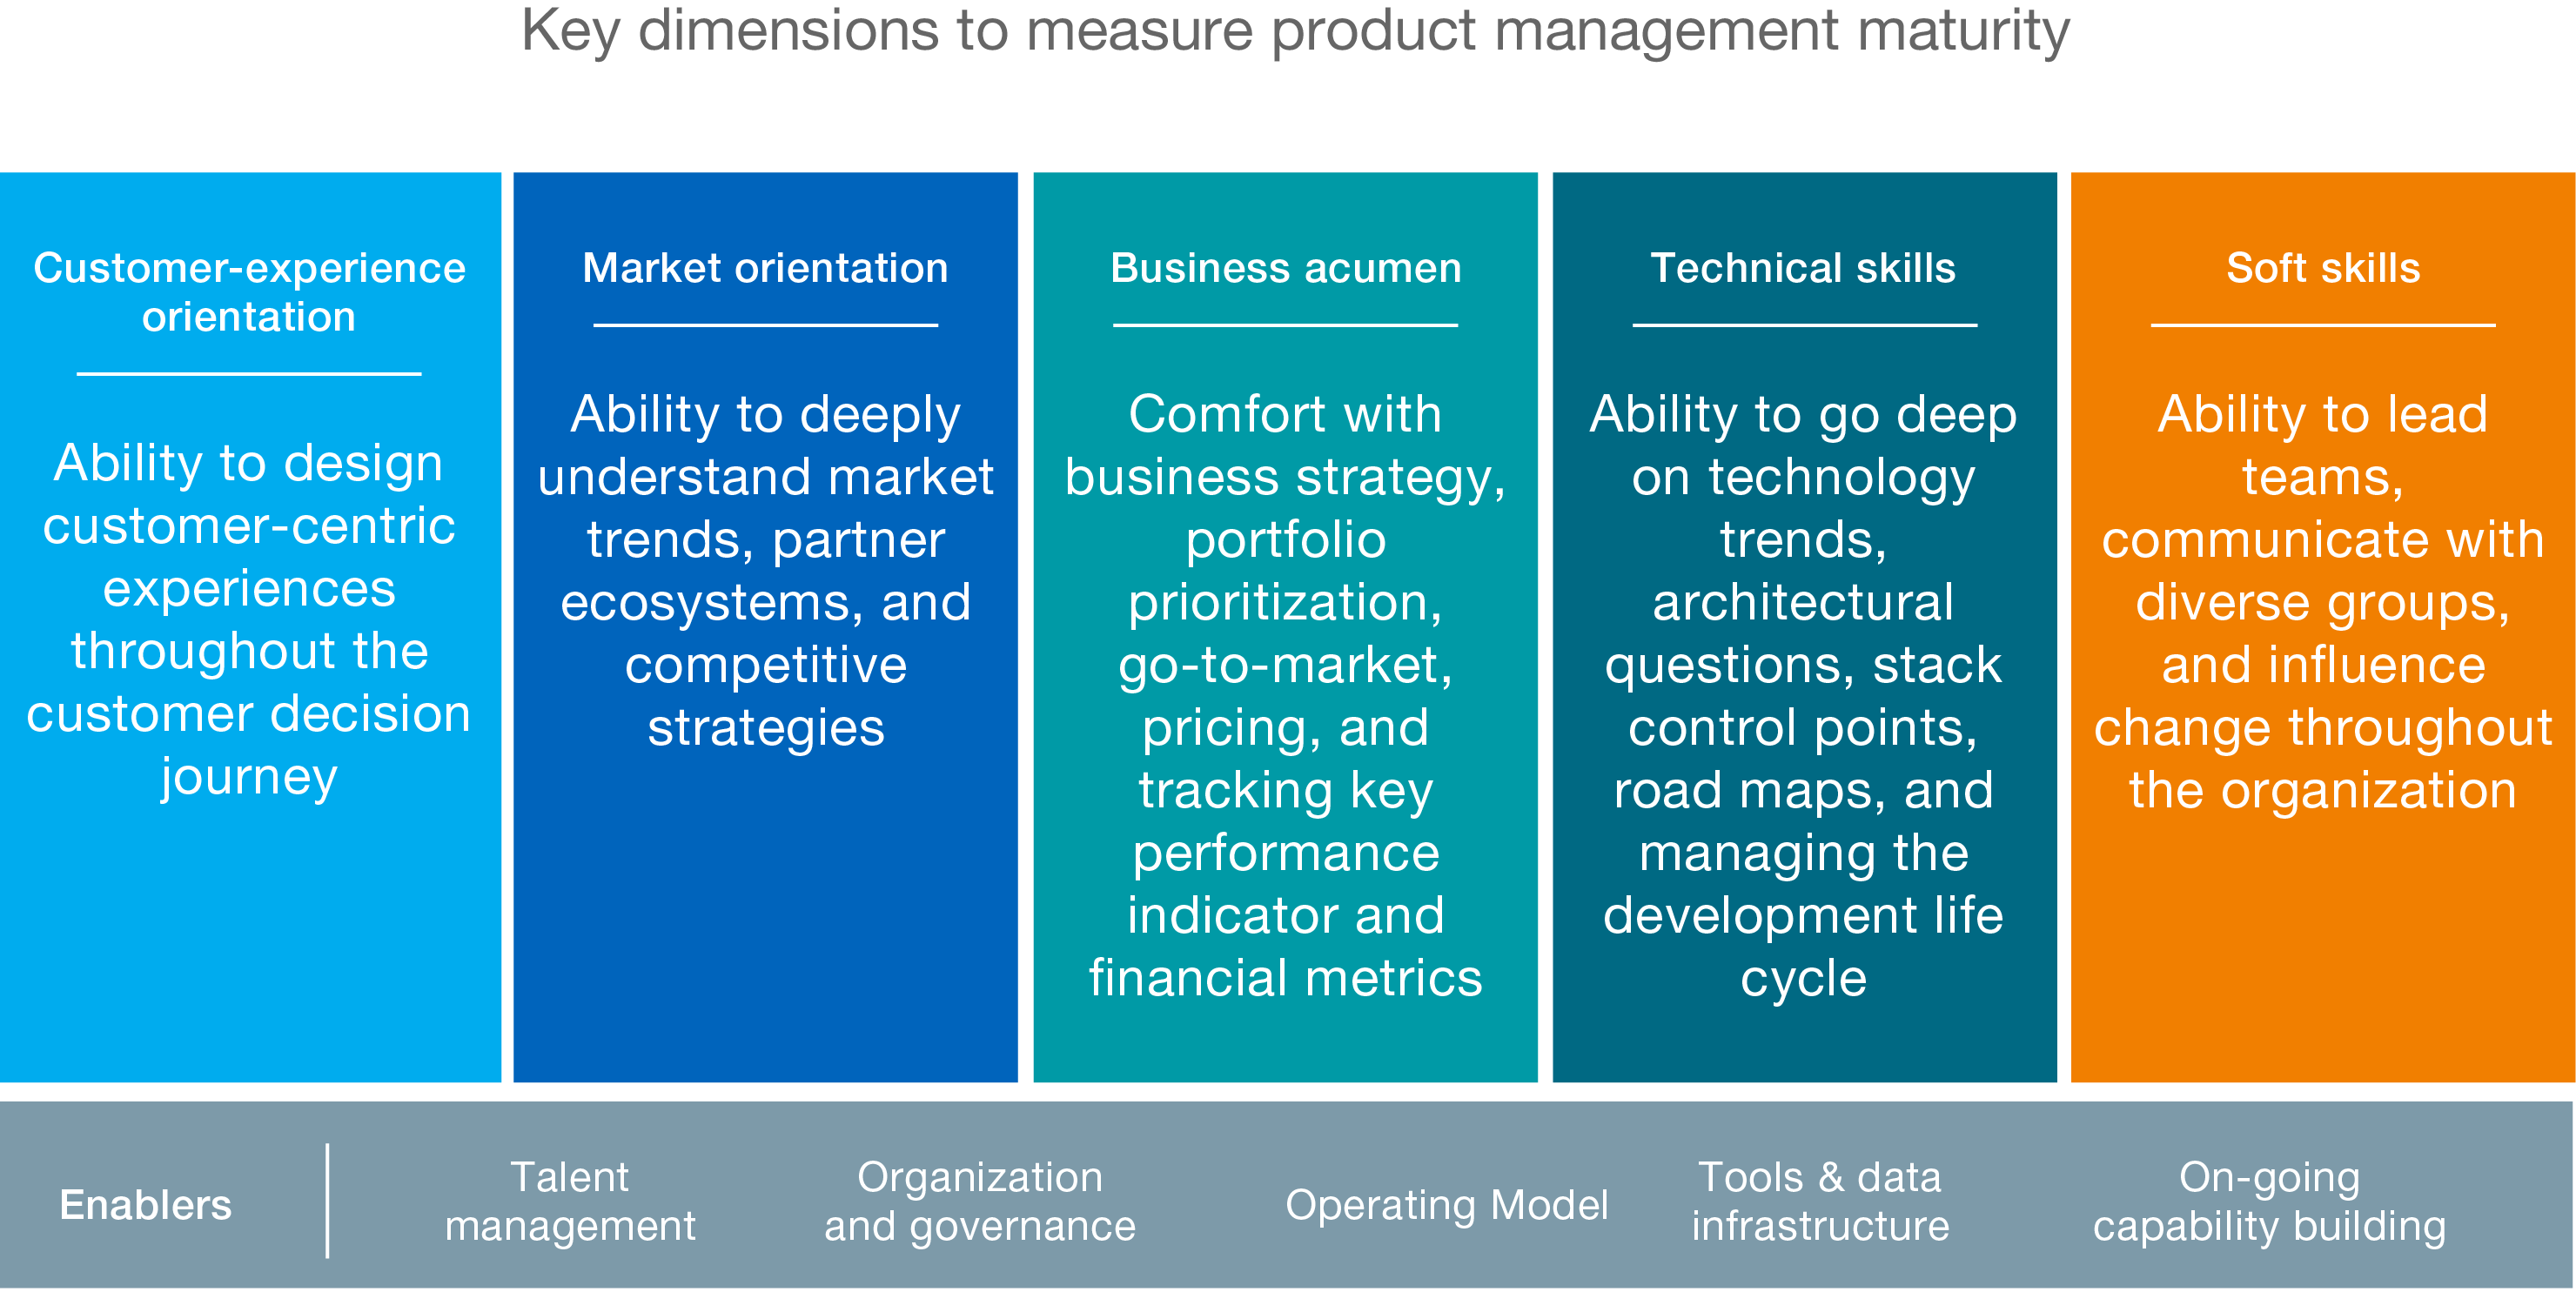 Key dimensions to measure product management maturity